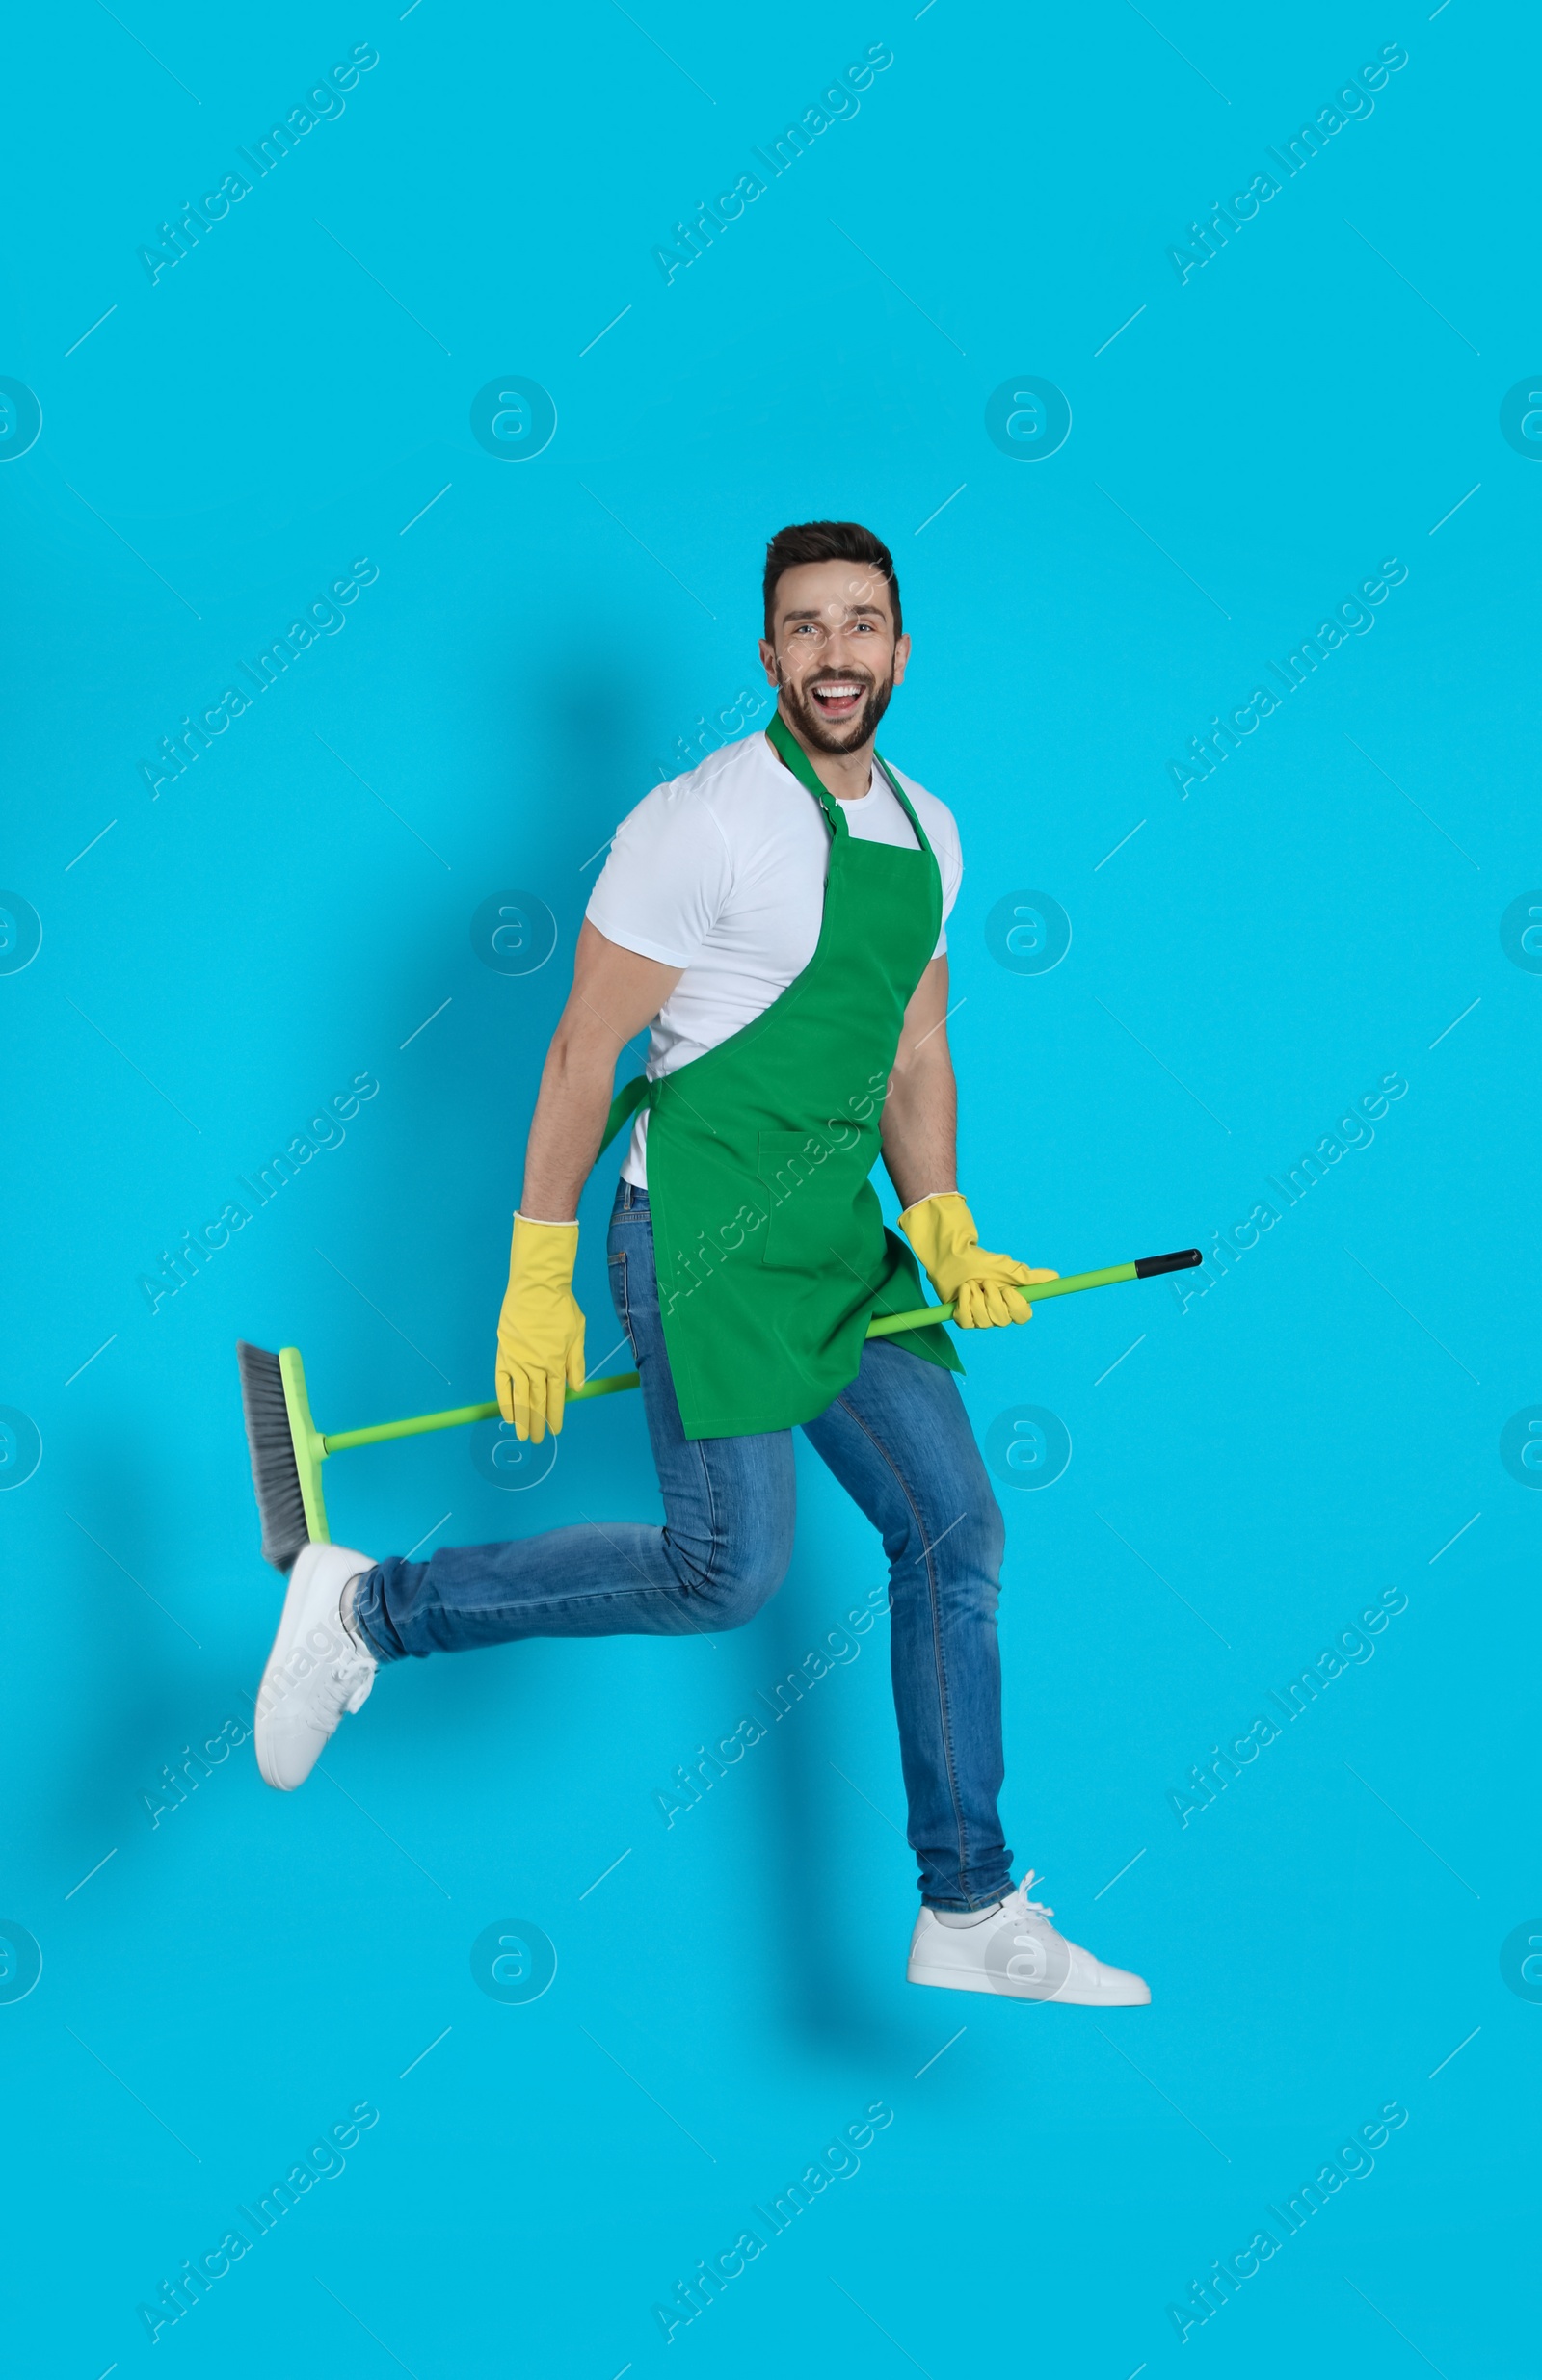 Photo of Man with green broom jumping on light blue background